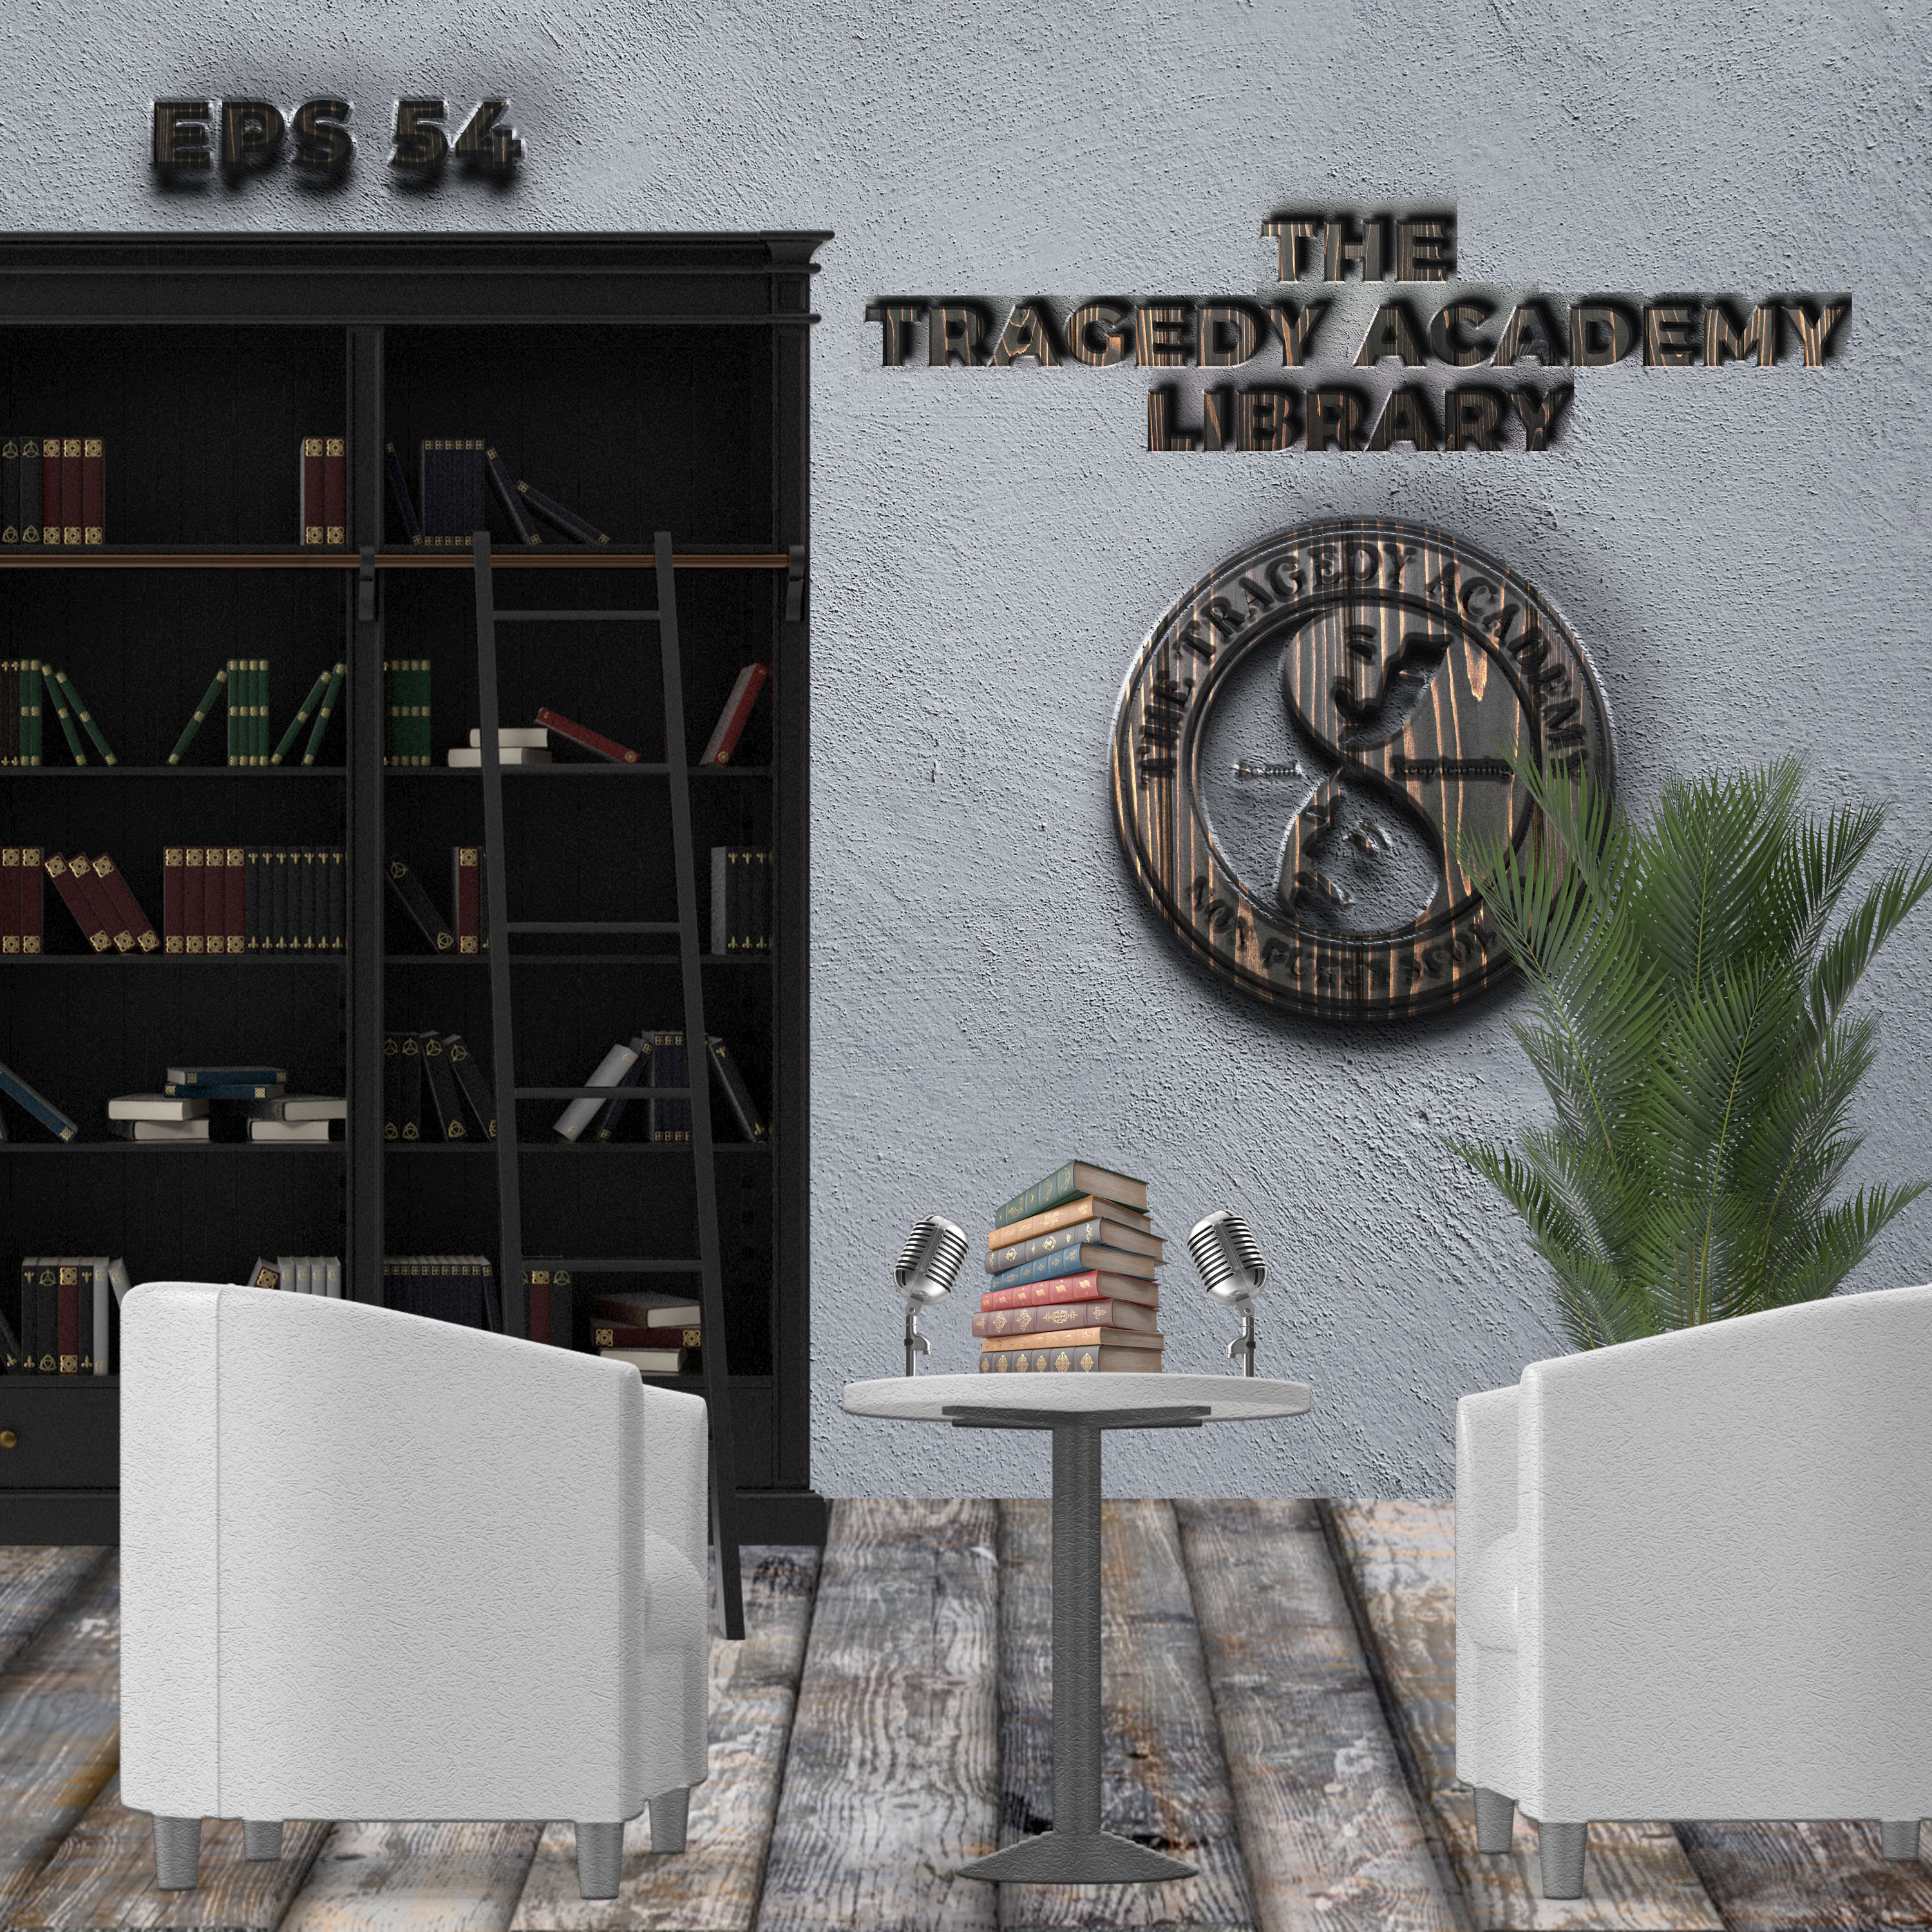 The Tragedy Academy Library Image